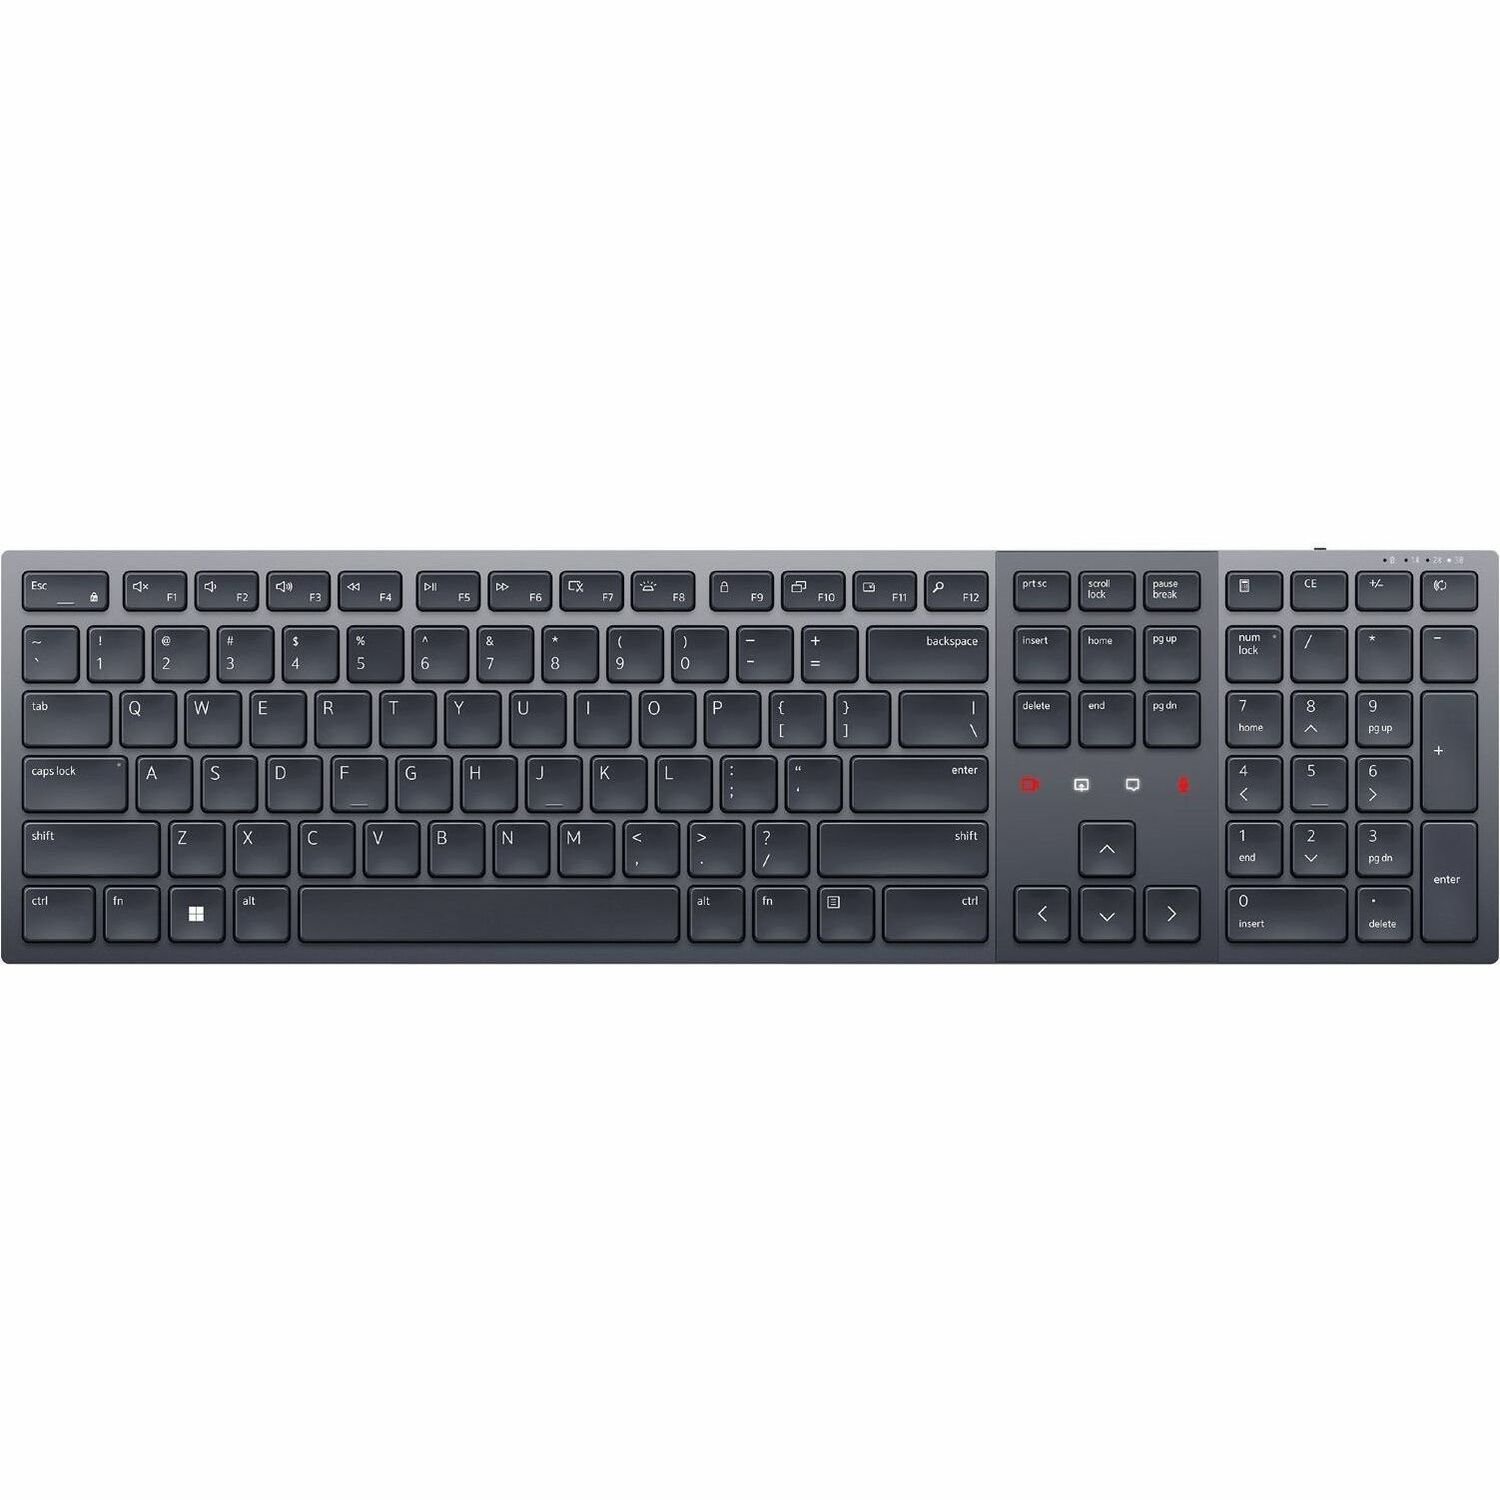 Dell Premier Collaboration KB900 Keyboard - Wireless Connectivity - USB Interface - English (US) - QWERTY Layout - Graphite